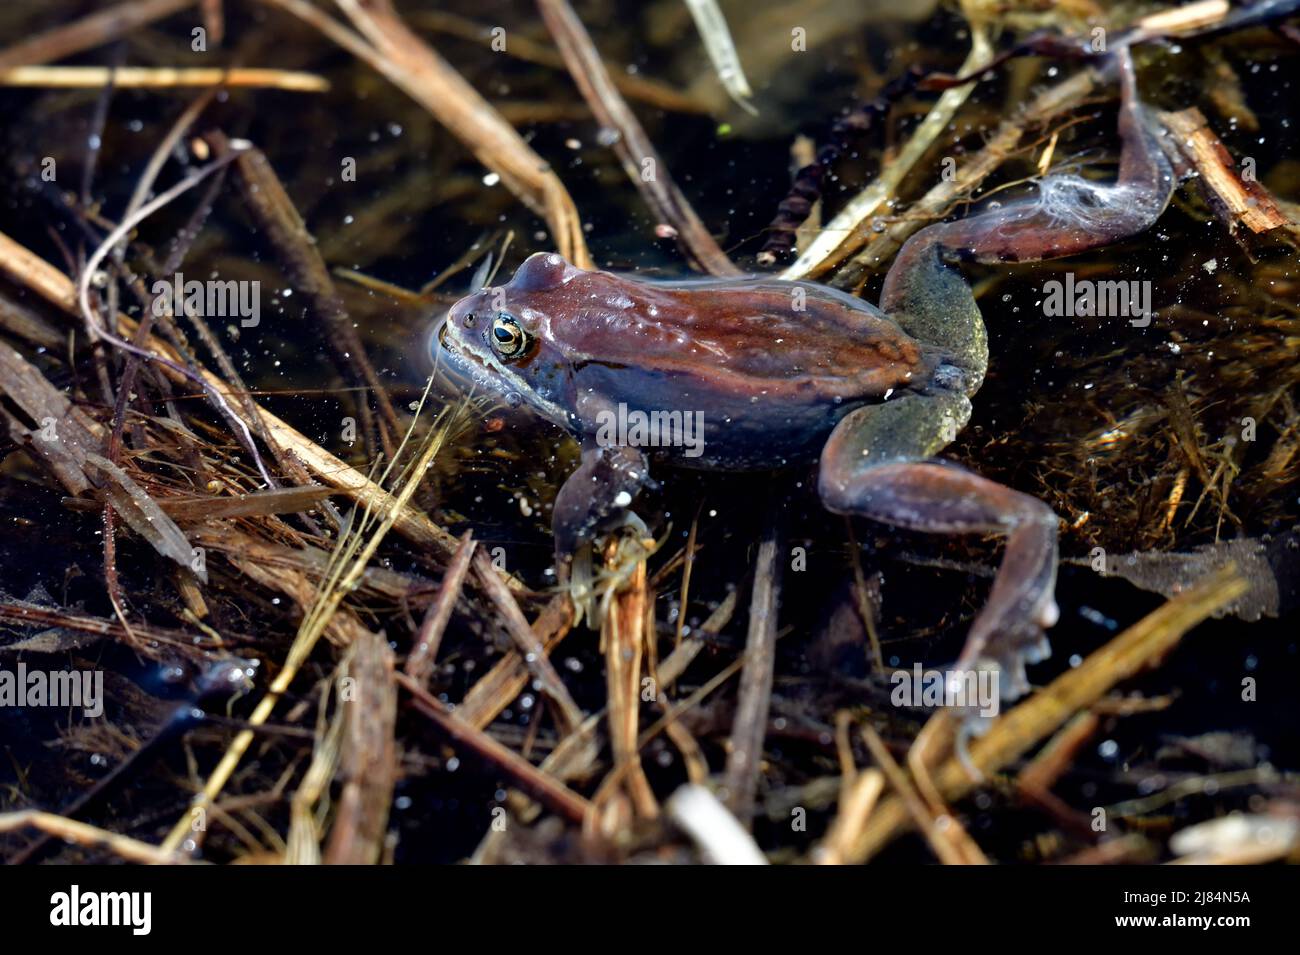 A top view of a wild wood frog  'Rana sylvatica', floating in shallow water in a wetland area in rural Alberta Canada. Stock Photo